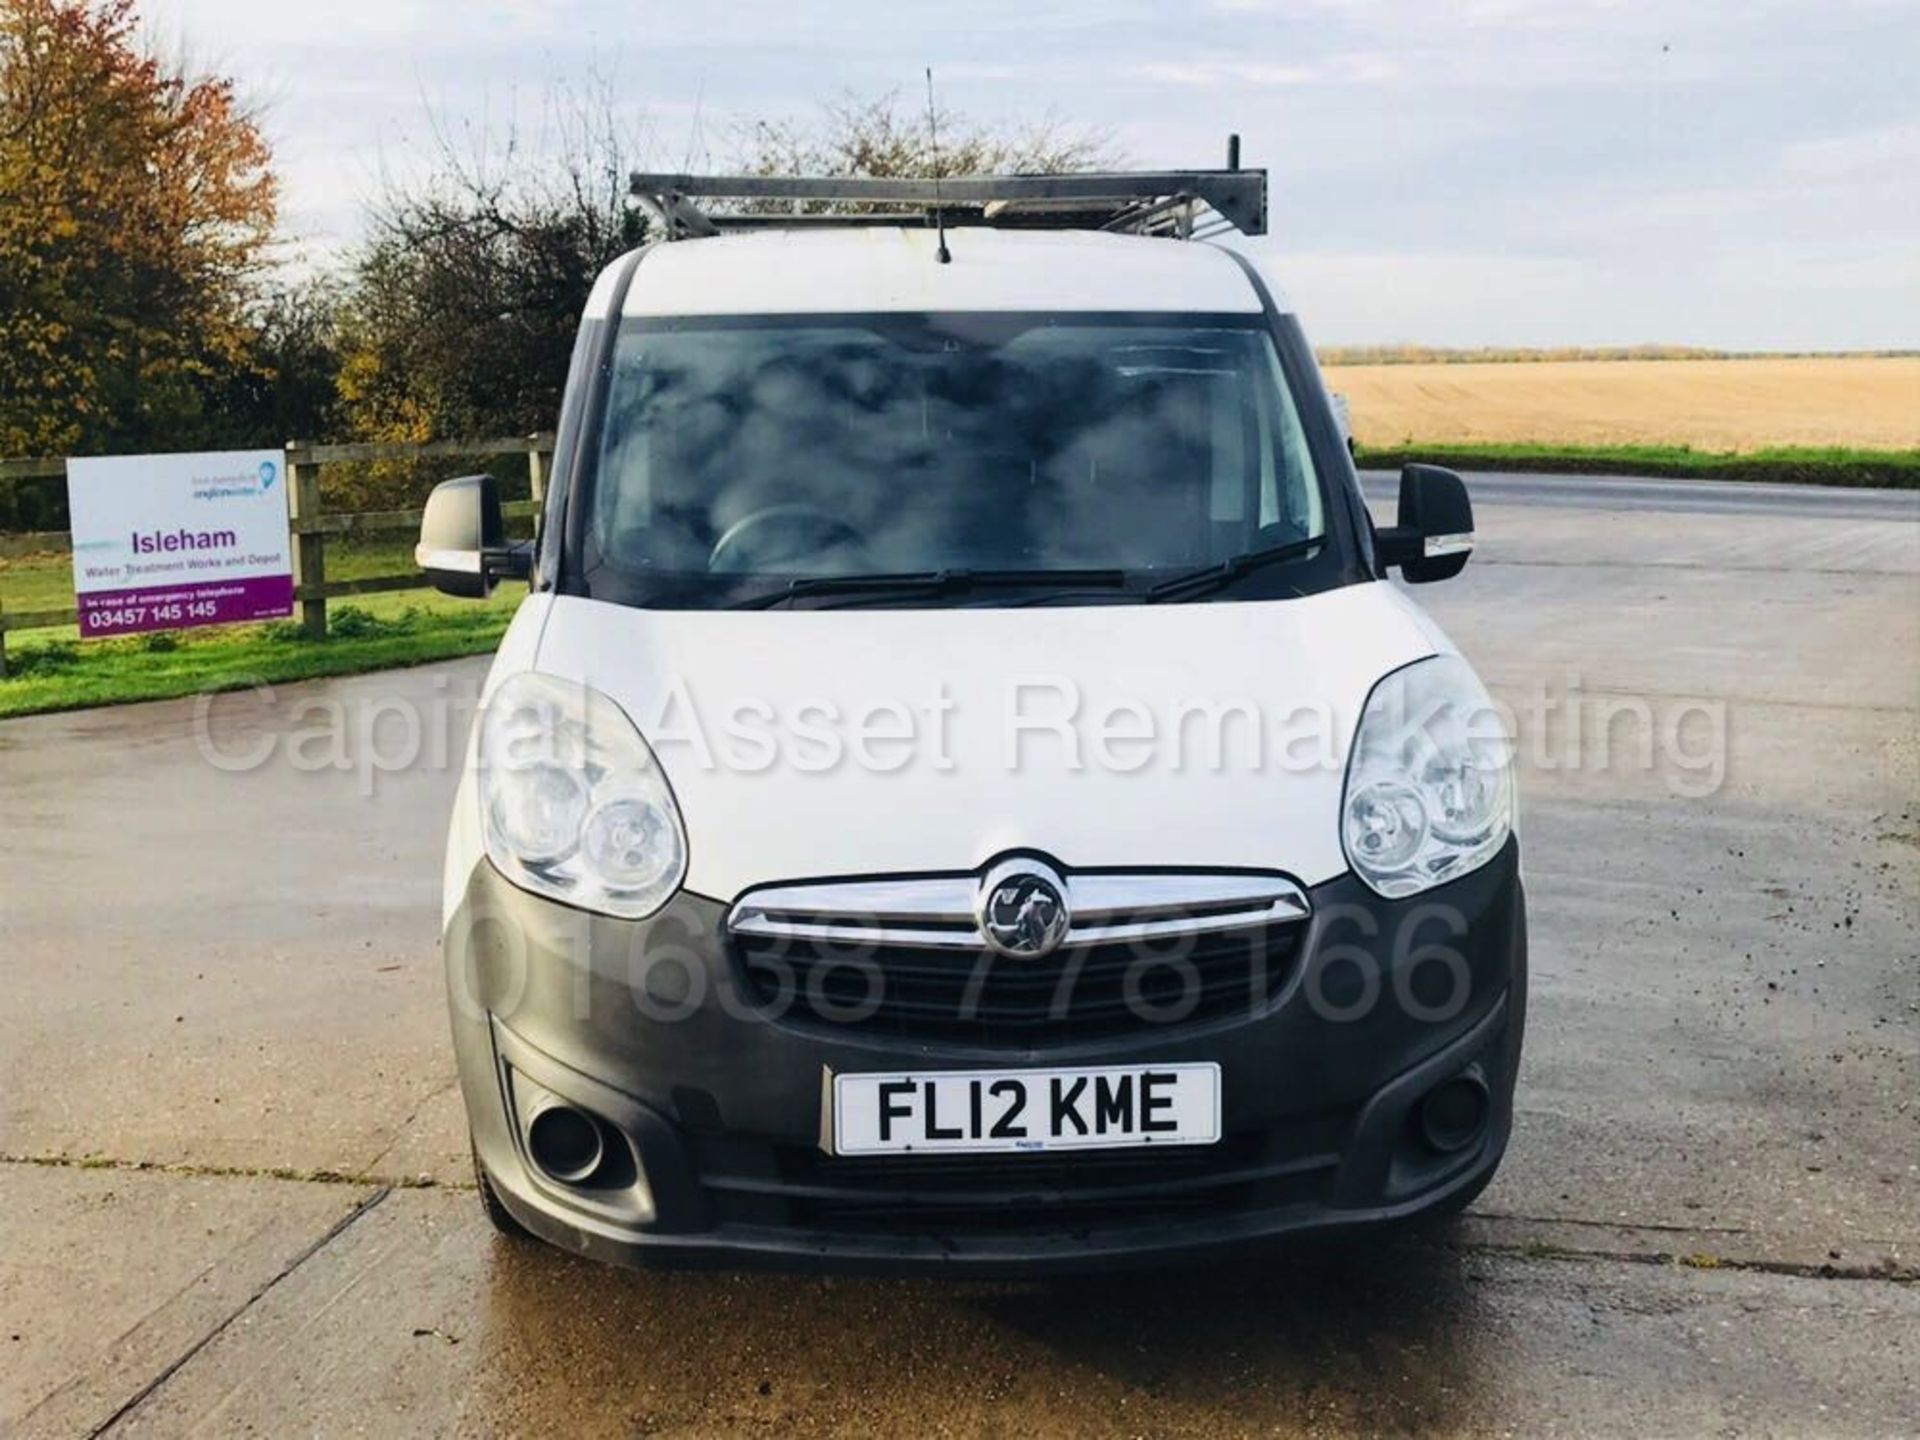 VAUXHALL COMBO 2000 L1H1 (2012 - NEW MODEL) '1.6 CDTI - 105 BHP - STOP / START' (1 OWNER FROM NEW) - Image 8 of 15